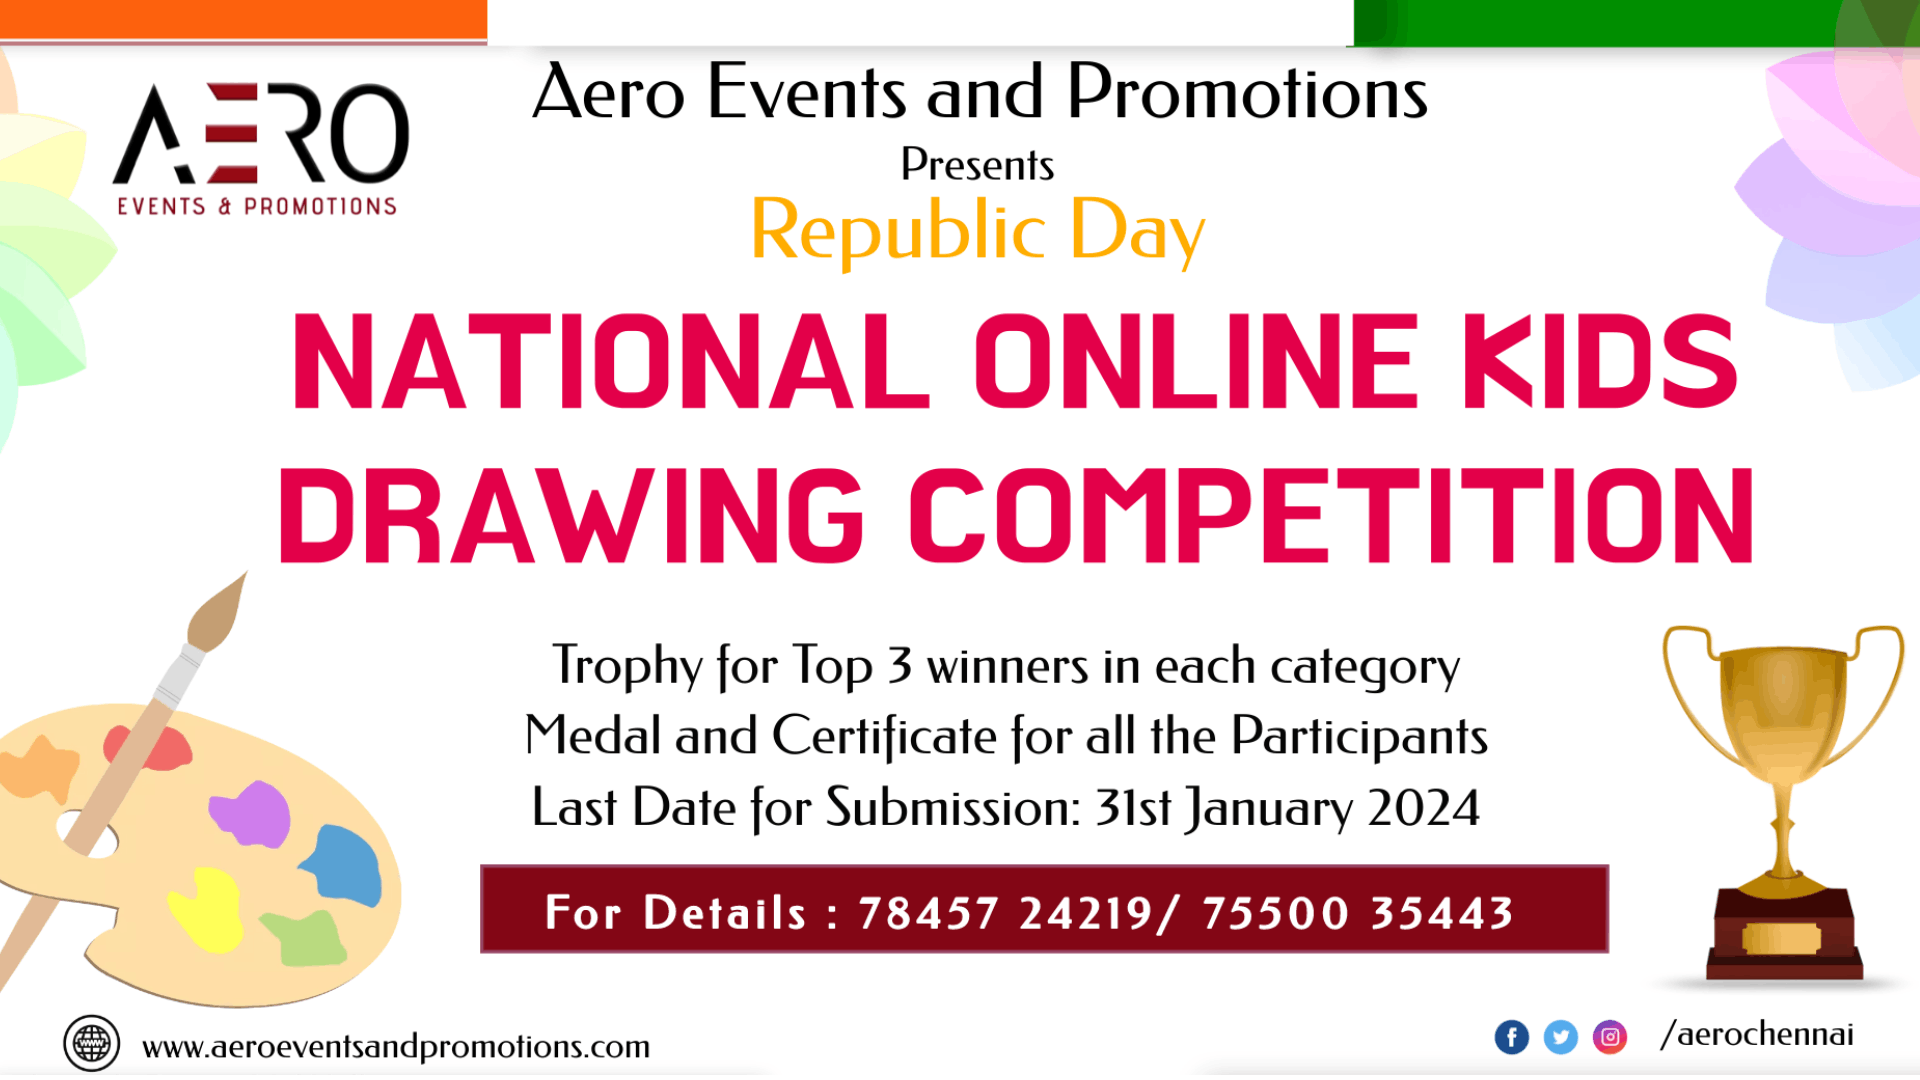 Republic Day Drawing for Kids: Drawing Ideas, Fun Activities and More